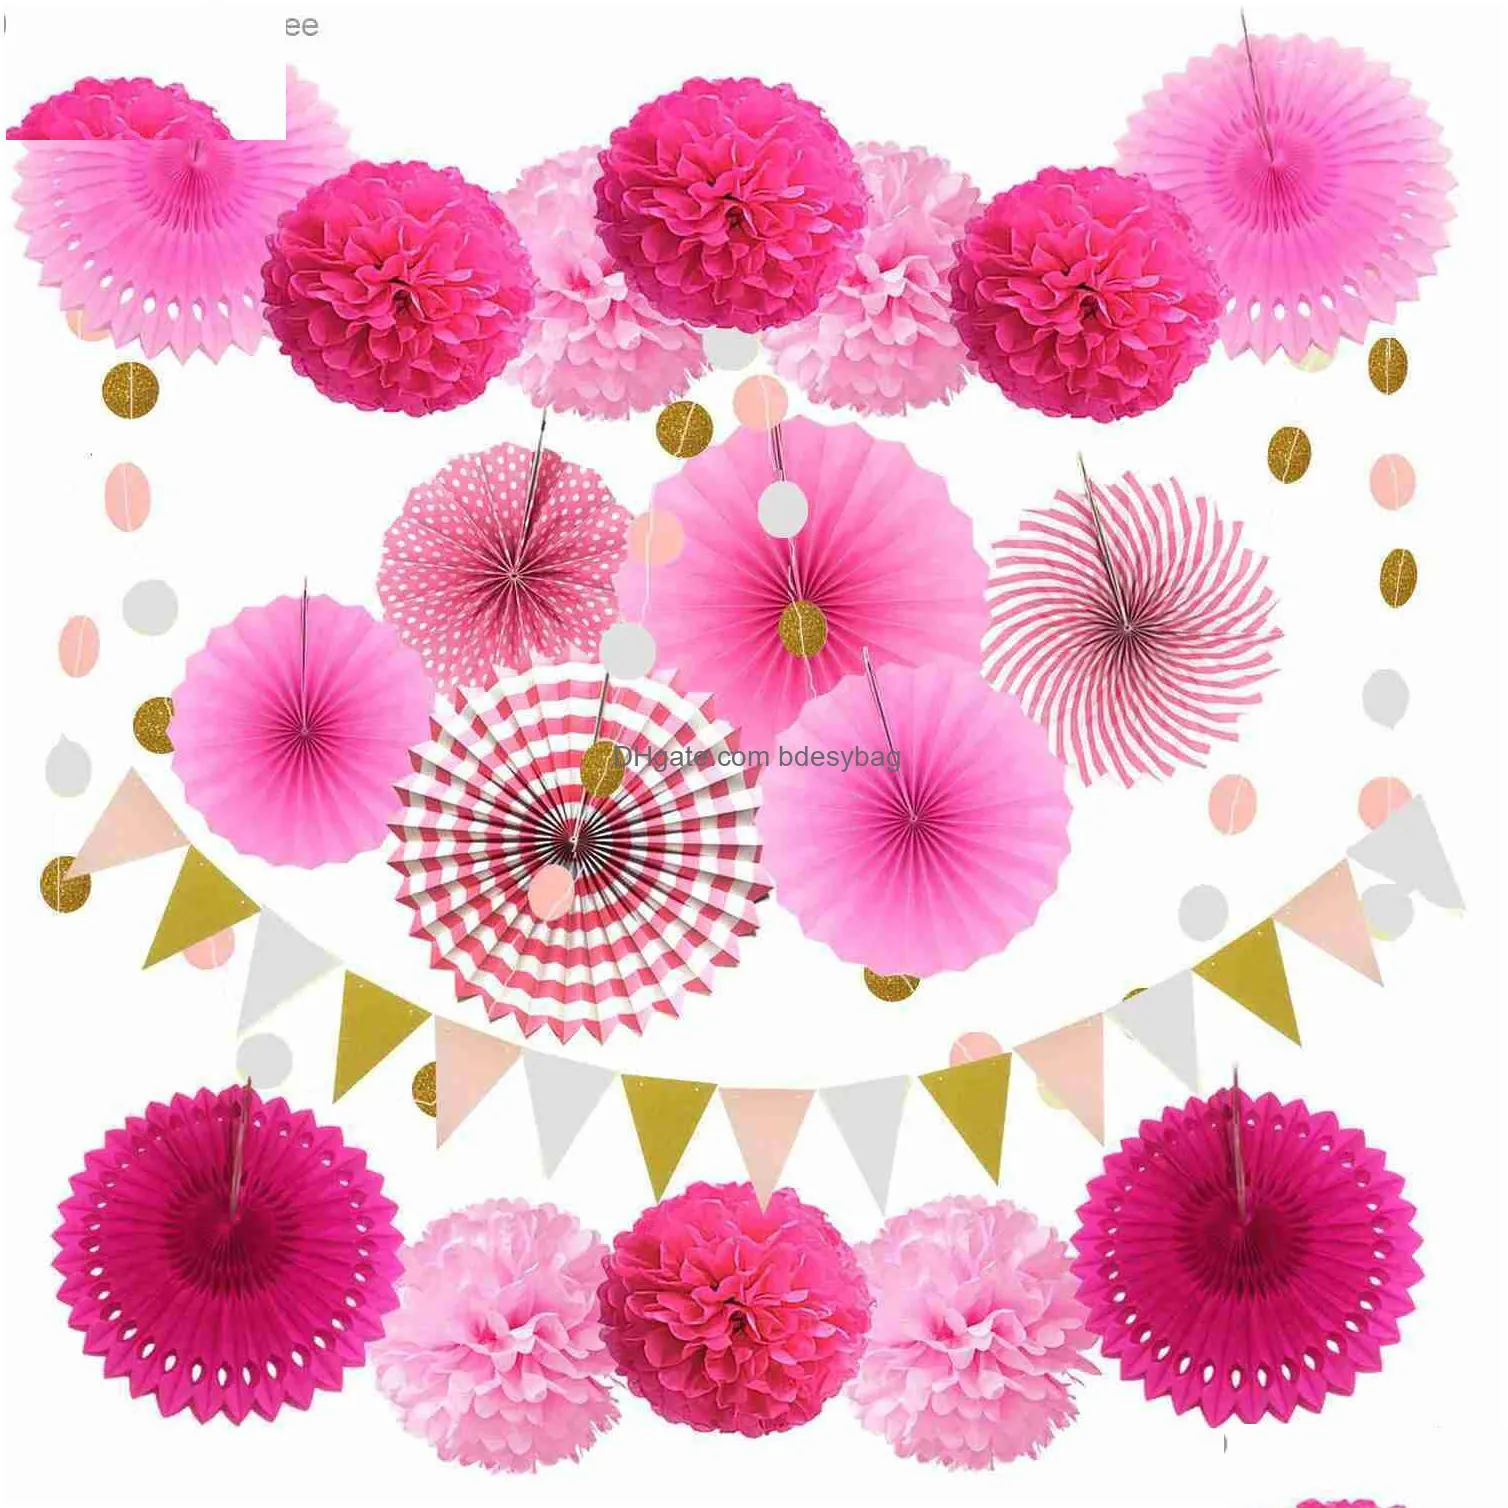 other festive party supplies 21 pcs paper fans garland pom poms flowers christmas halloween decoration wedding baby shower birthday home decor 230504